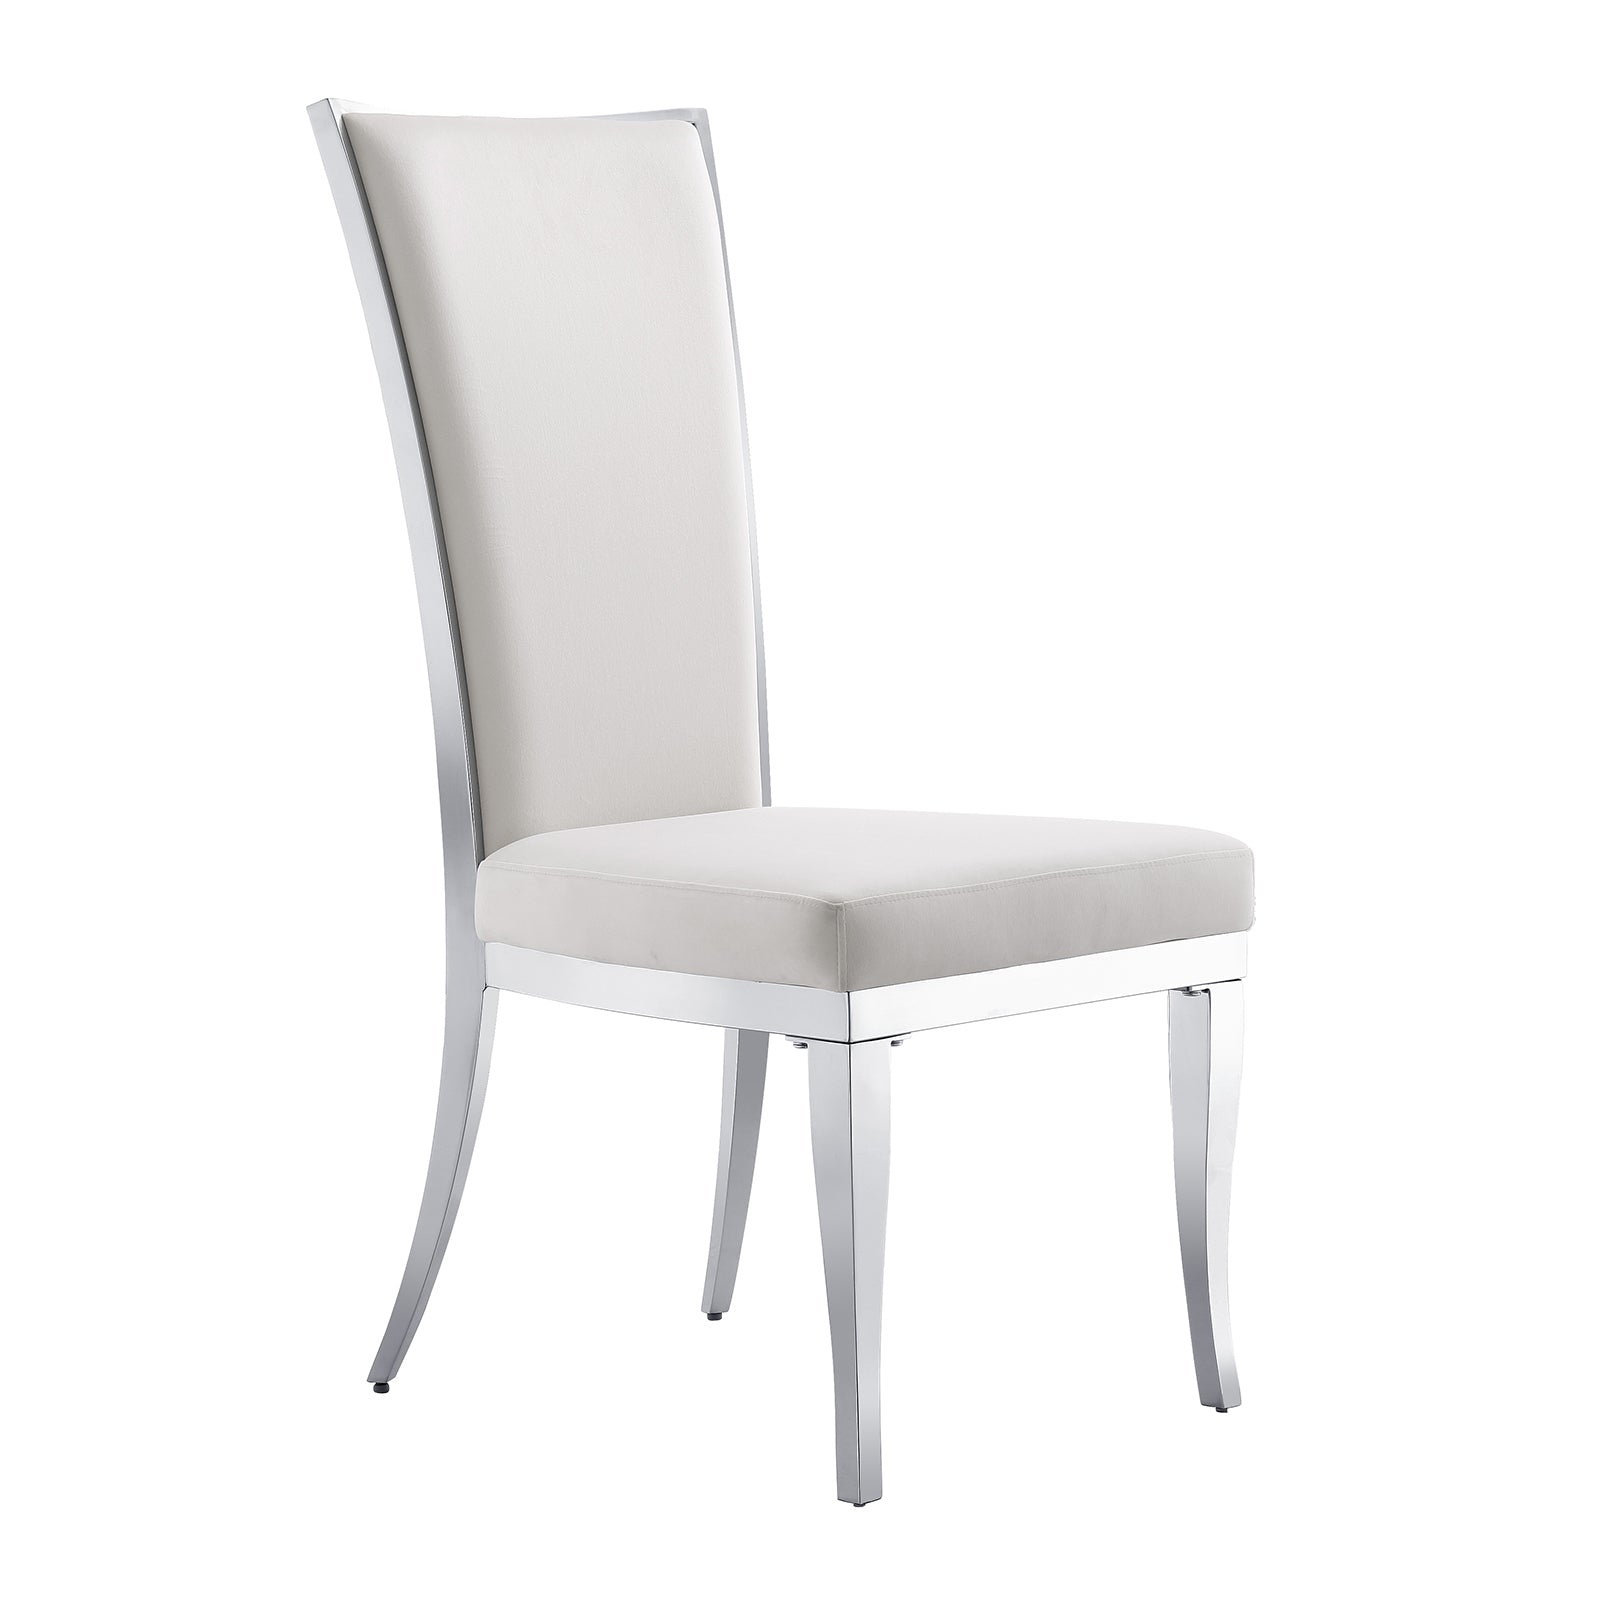 White velvet Dining Chairs | Hand-stitched diamond High Back | C153